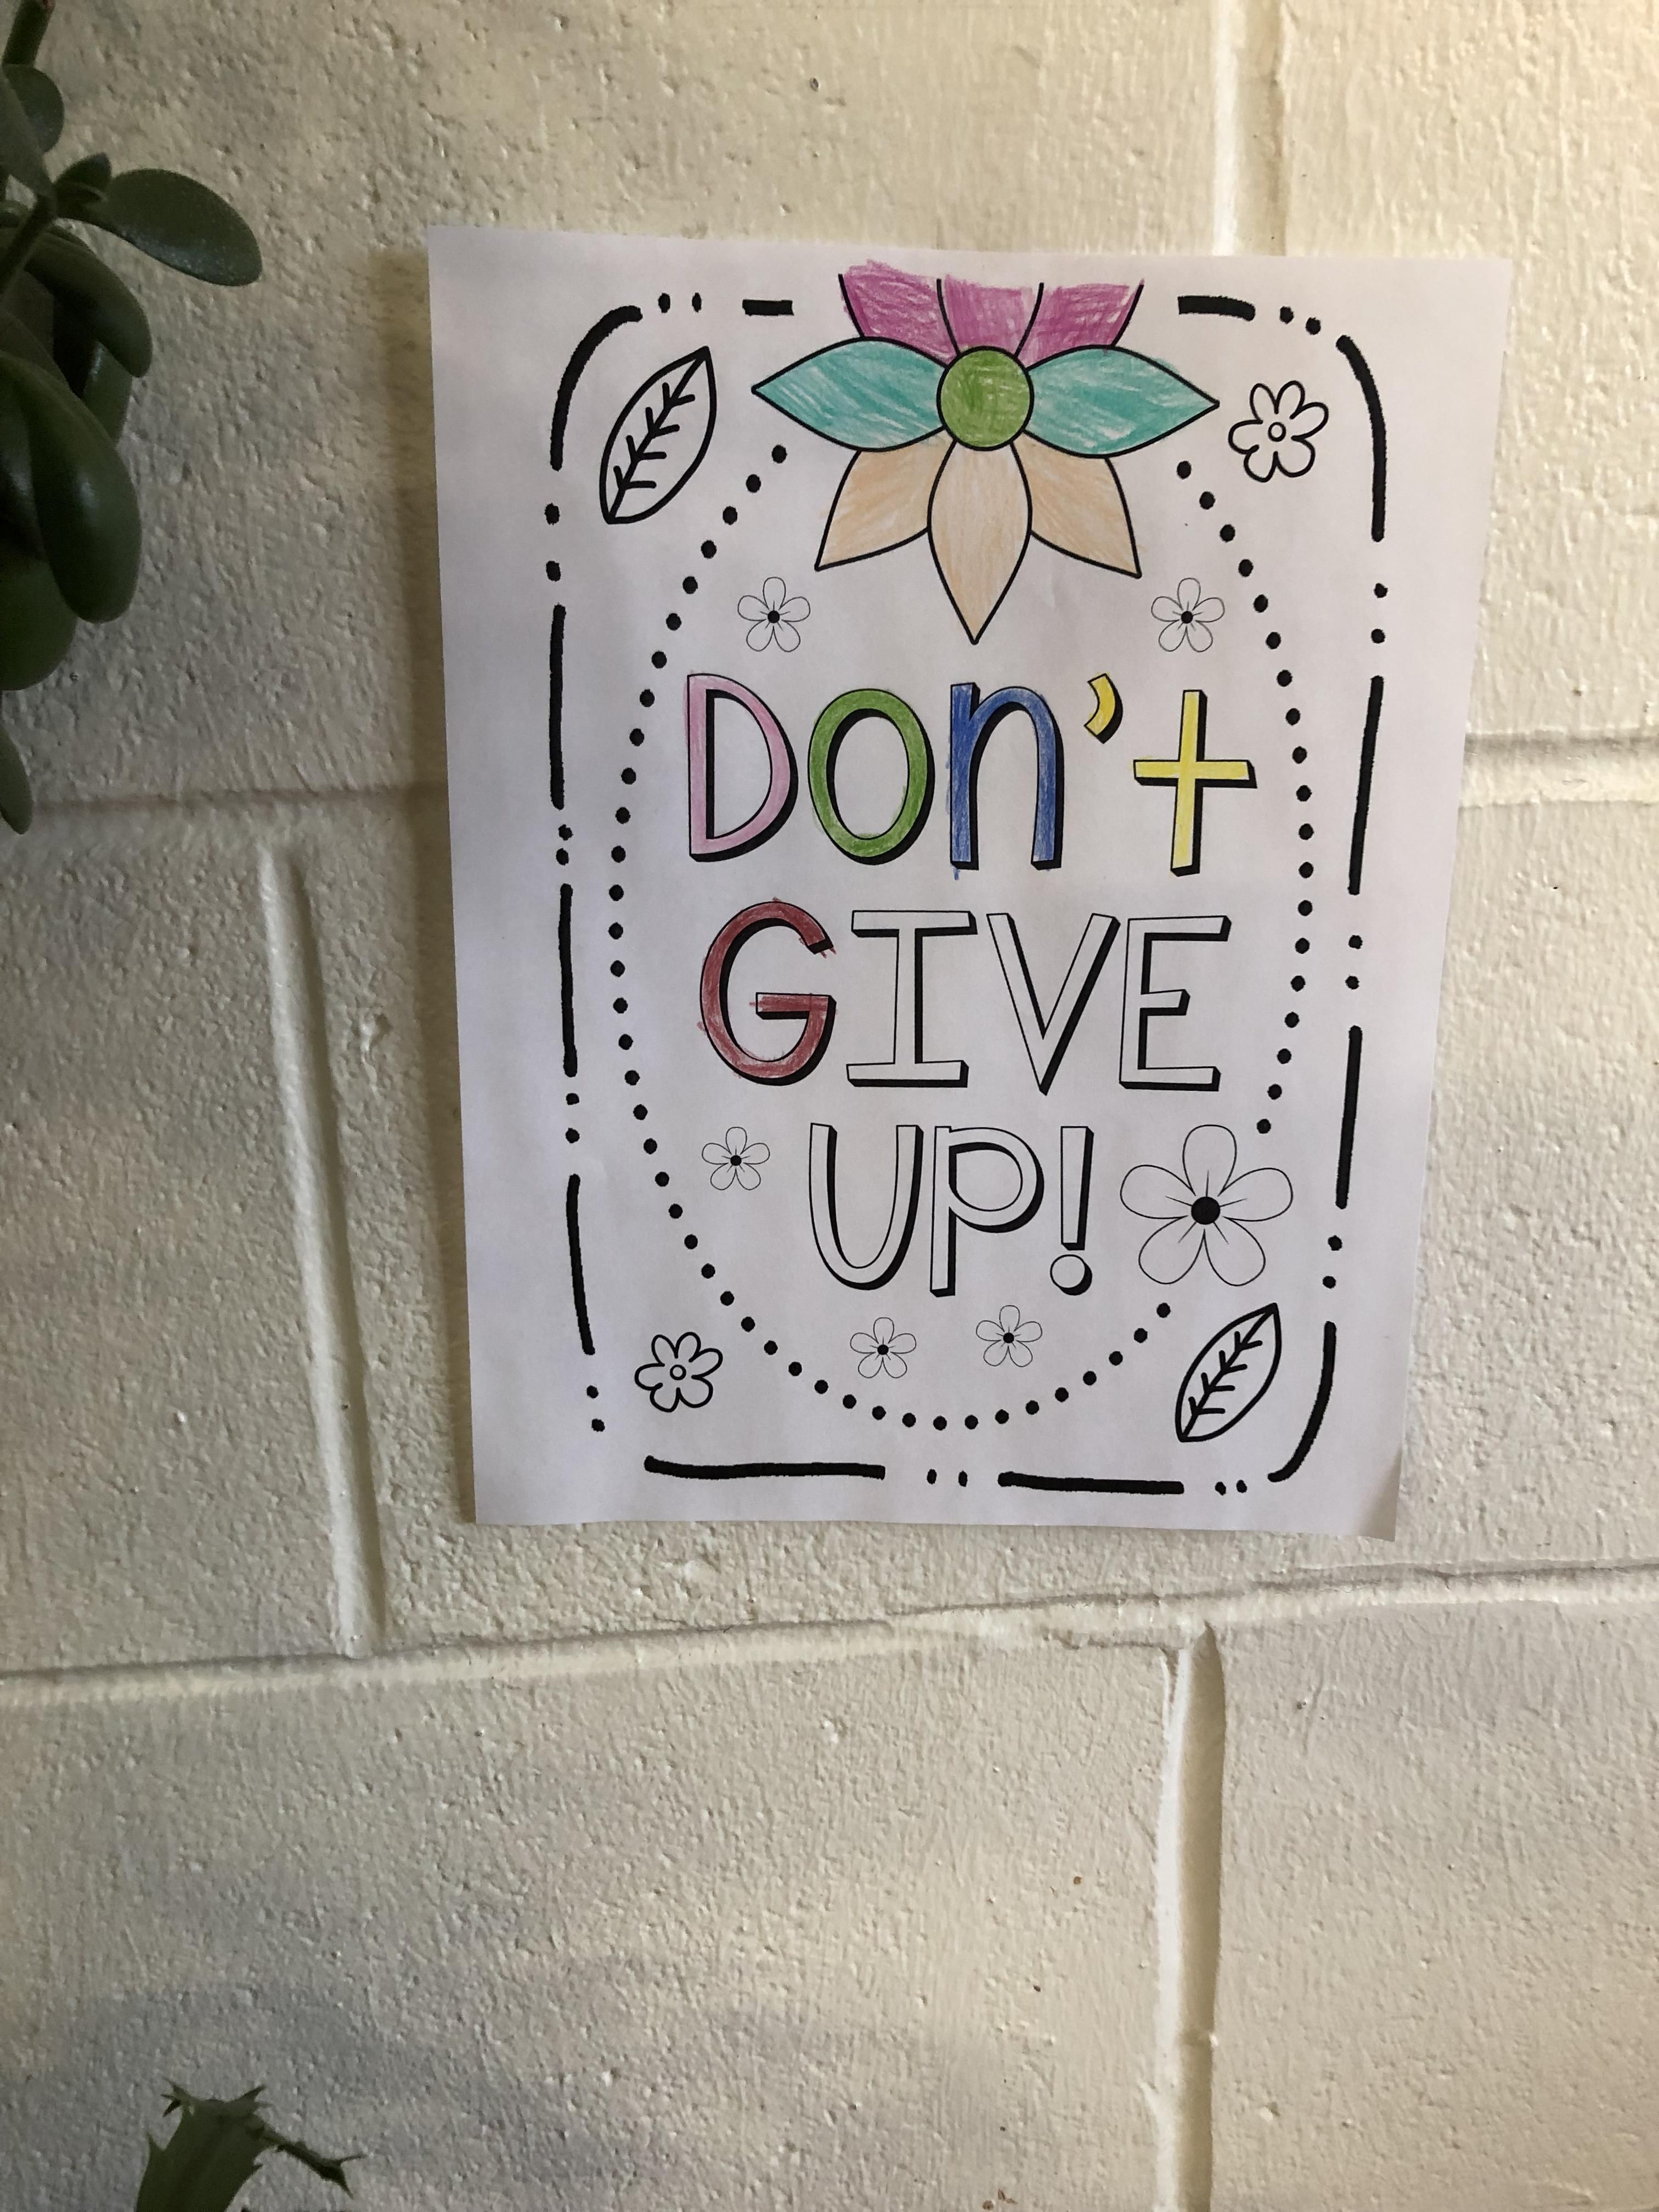 This sign in my kid’s elementary school fills me with nihilistic joy.